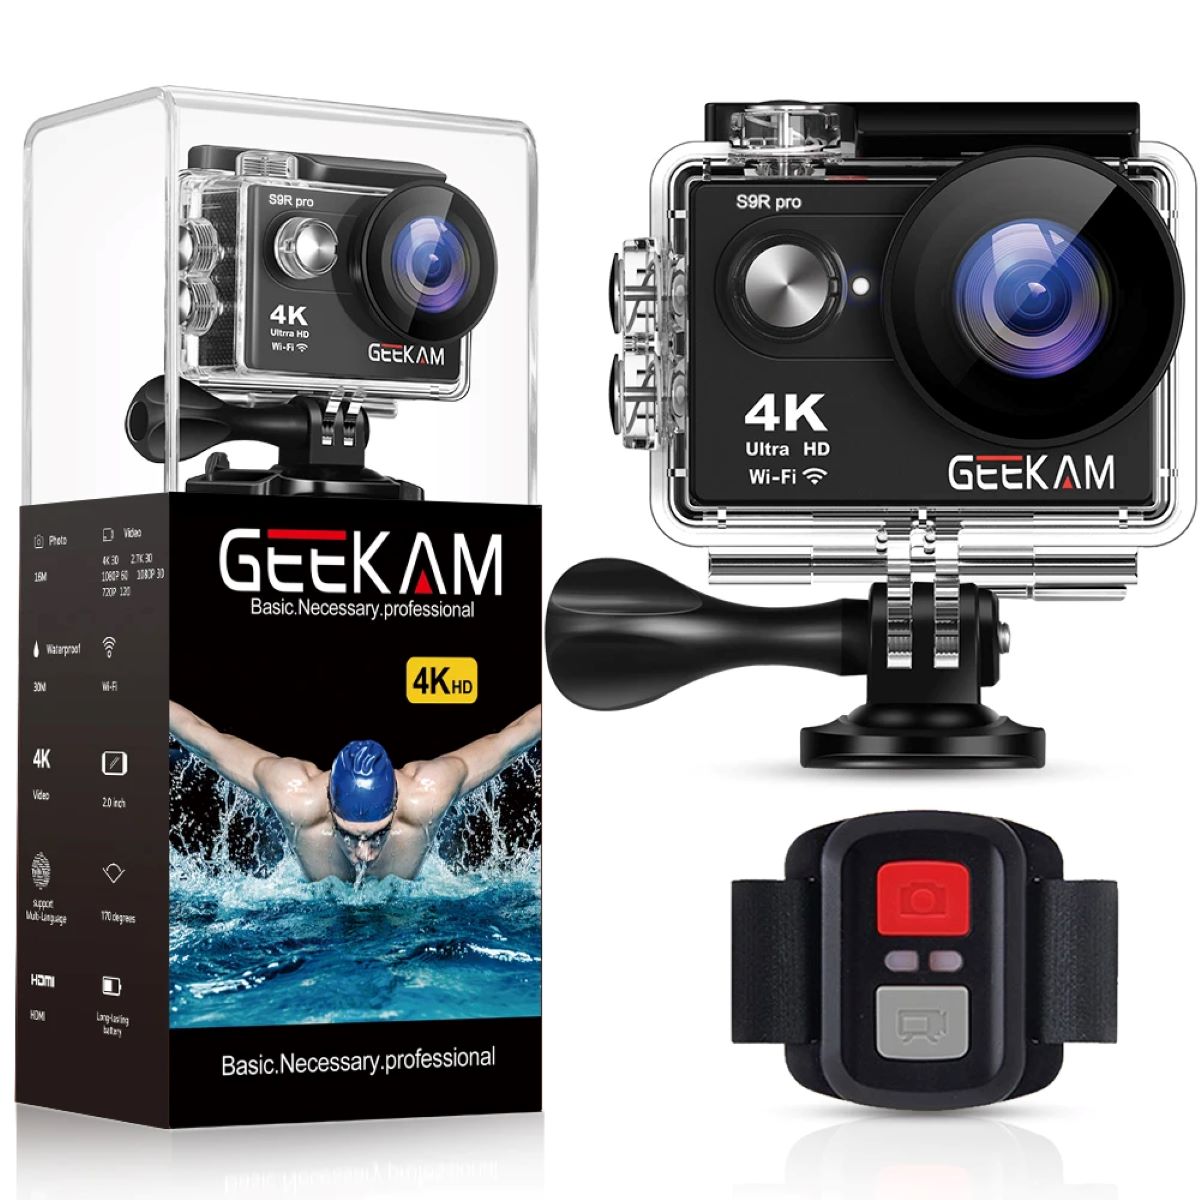 Geekam 4K 30fps Action Camera – How To Use